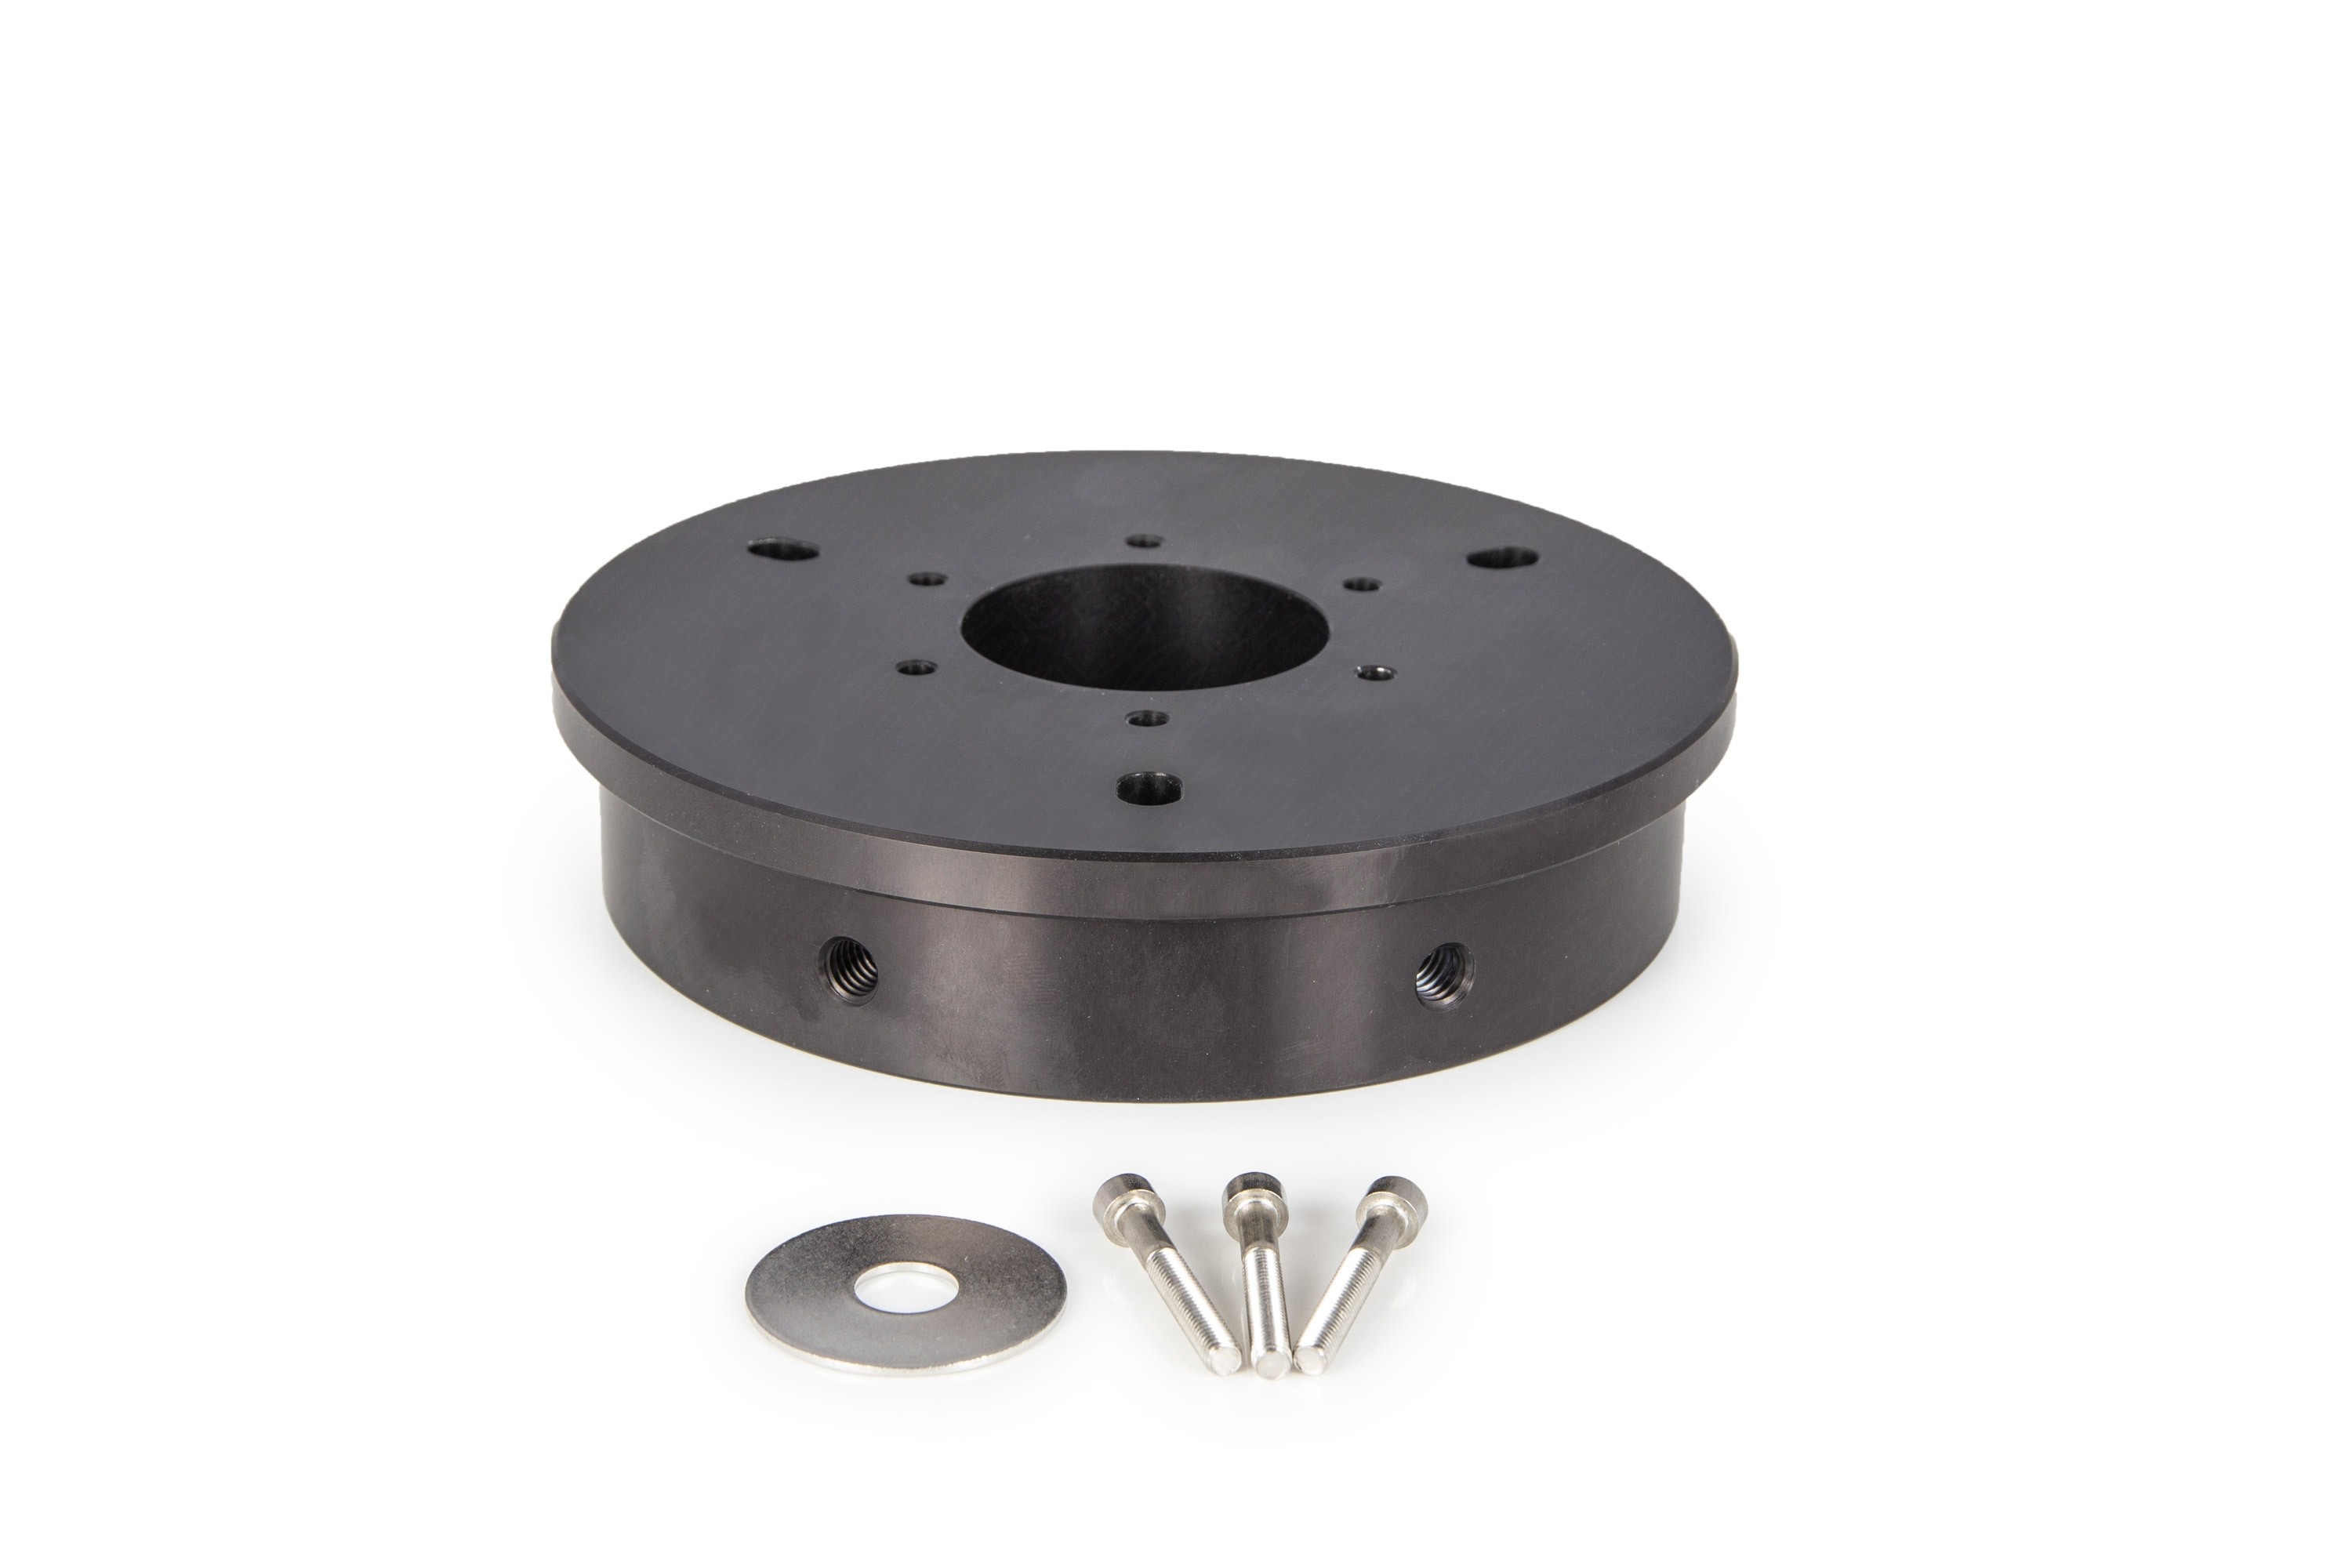 Baader Tripod Adapter Flange for Celestron CGEM-DX and CGE-Pro